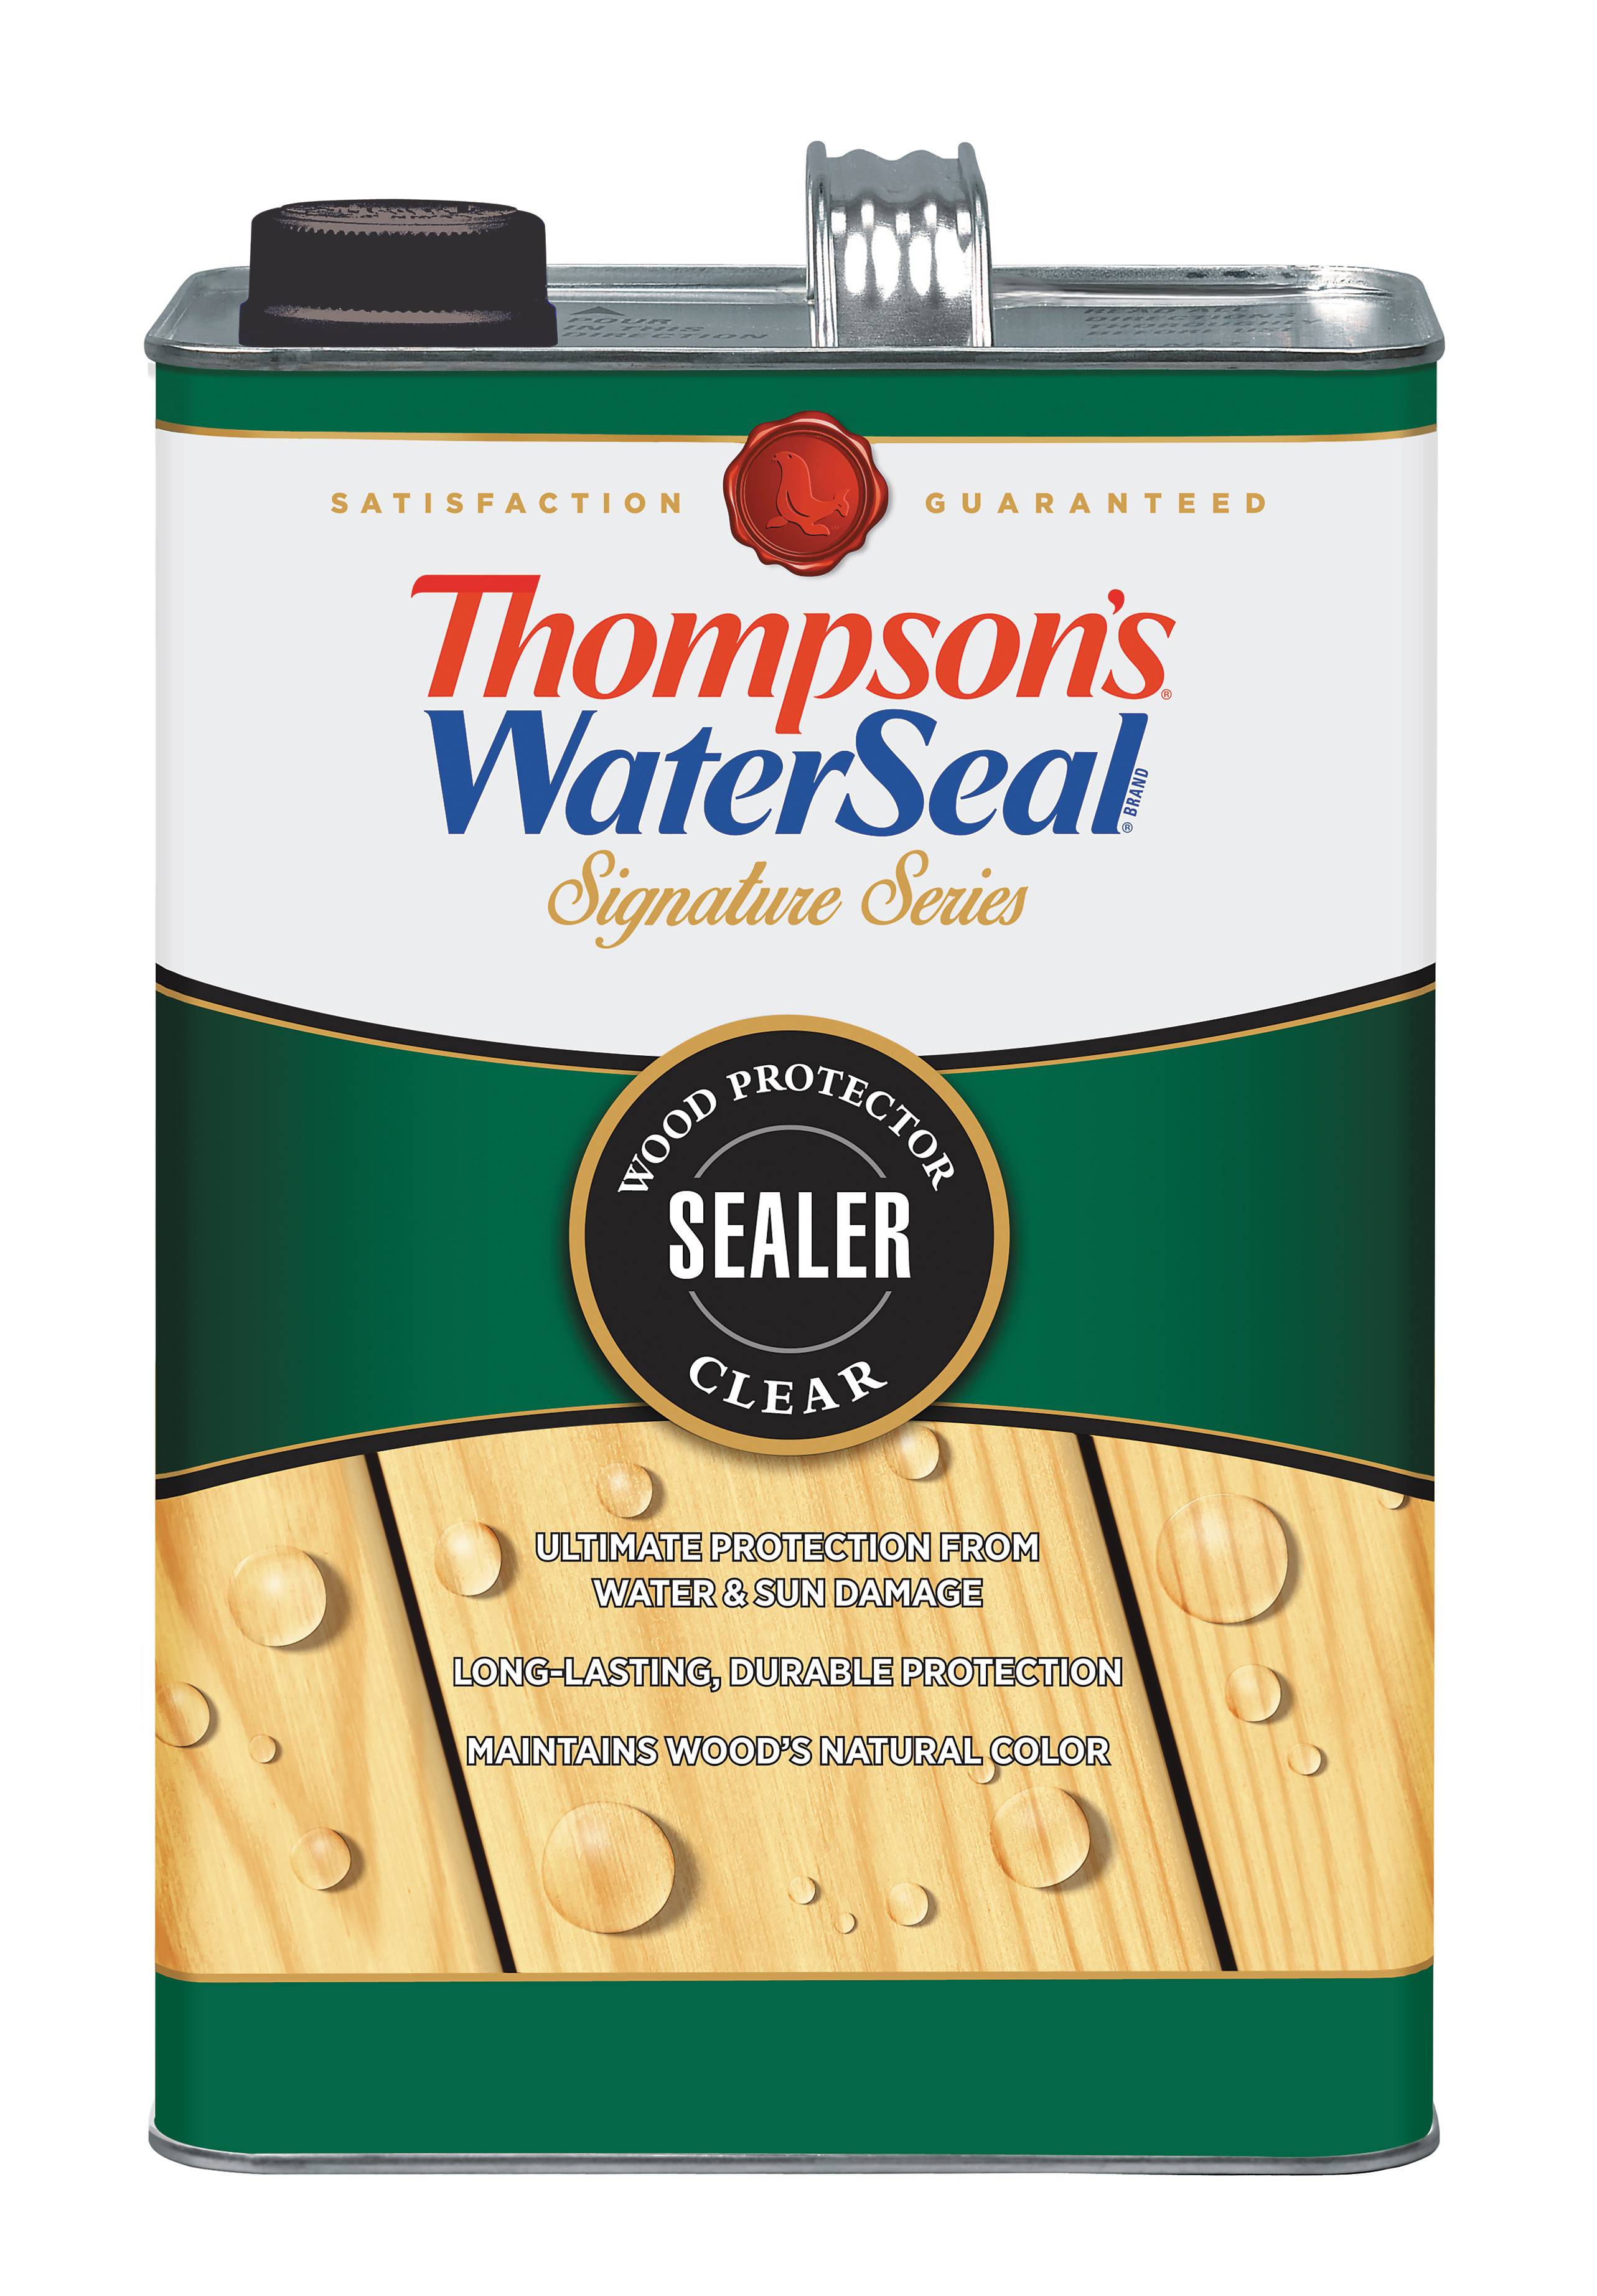 thompson-s-waterseal-introduces-signature-series-available